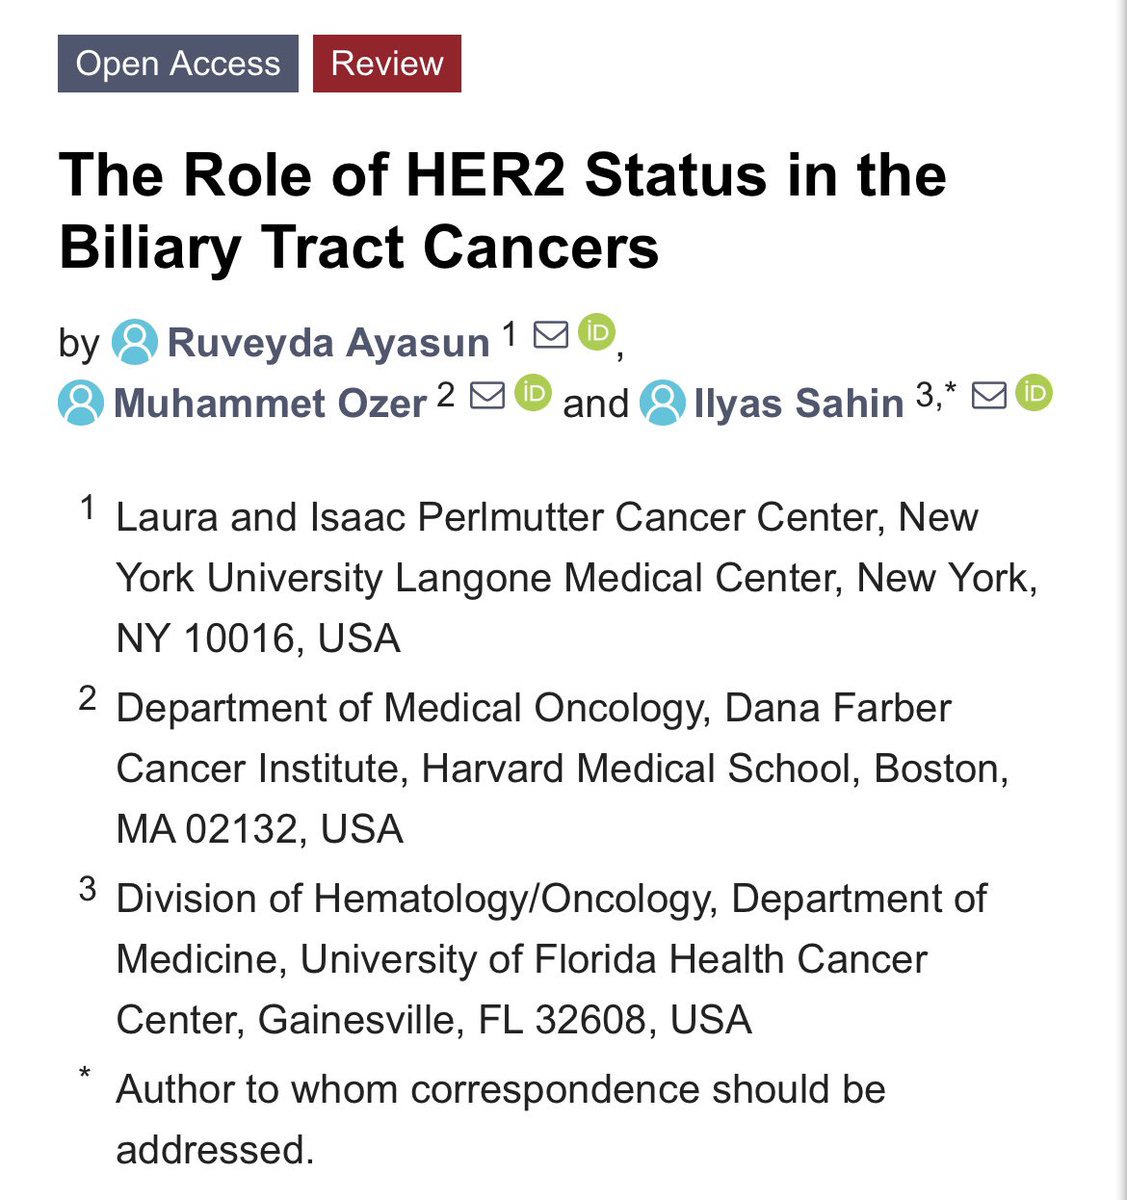 Exciting news! 
Our review article on 'The Role of HER2 Status in Biliary Tract Cancers' has been published in @Cancers_MDPI *. Congratulations to @AyasunMDPhD and @MuhammetOzerMD for their valuable contributions to this important topic. #HER2 #biliarytractcancer 
@UFHealthCancer